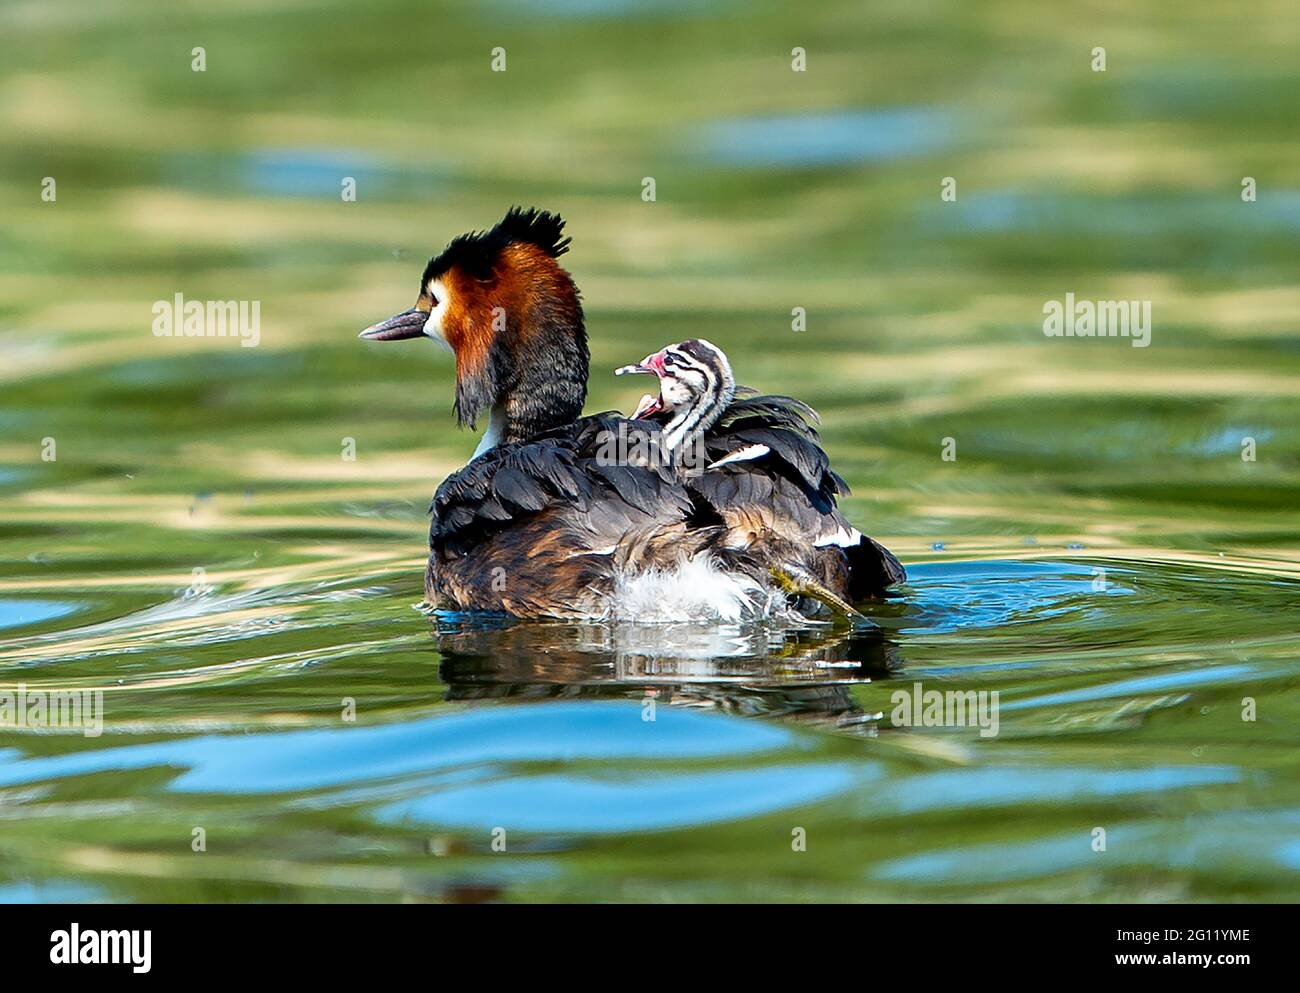 Great Crested Grebe (Podiceps cristatus) carrying a chick on its back, Linlithgow loch, Scotland, UK. Stock Photo